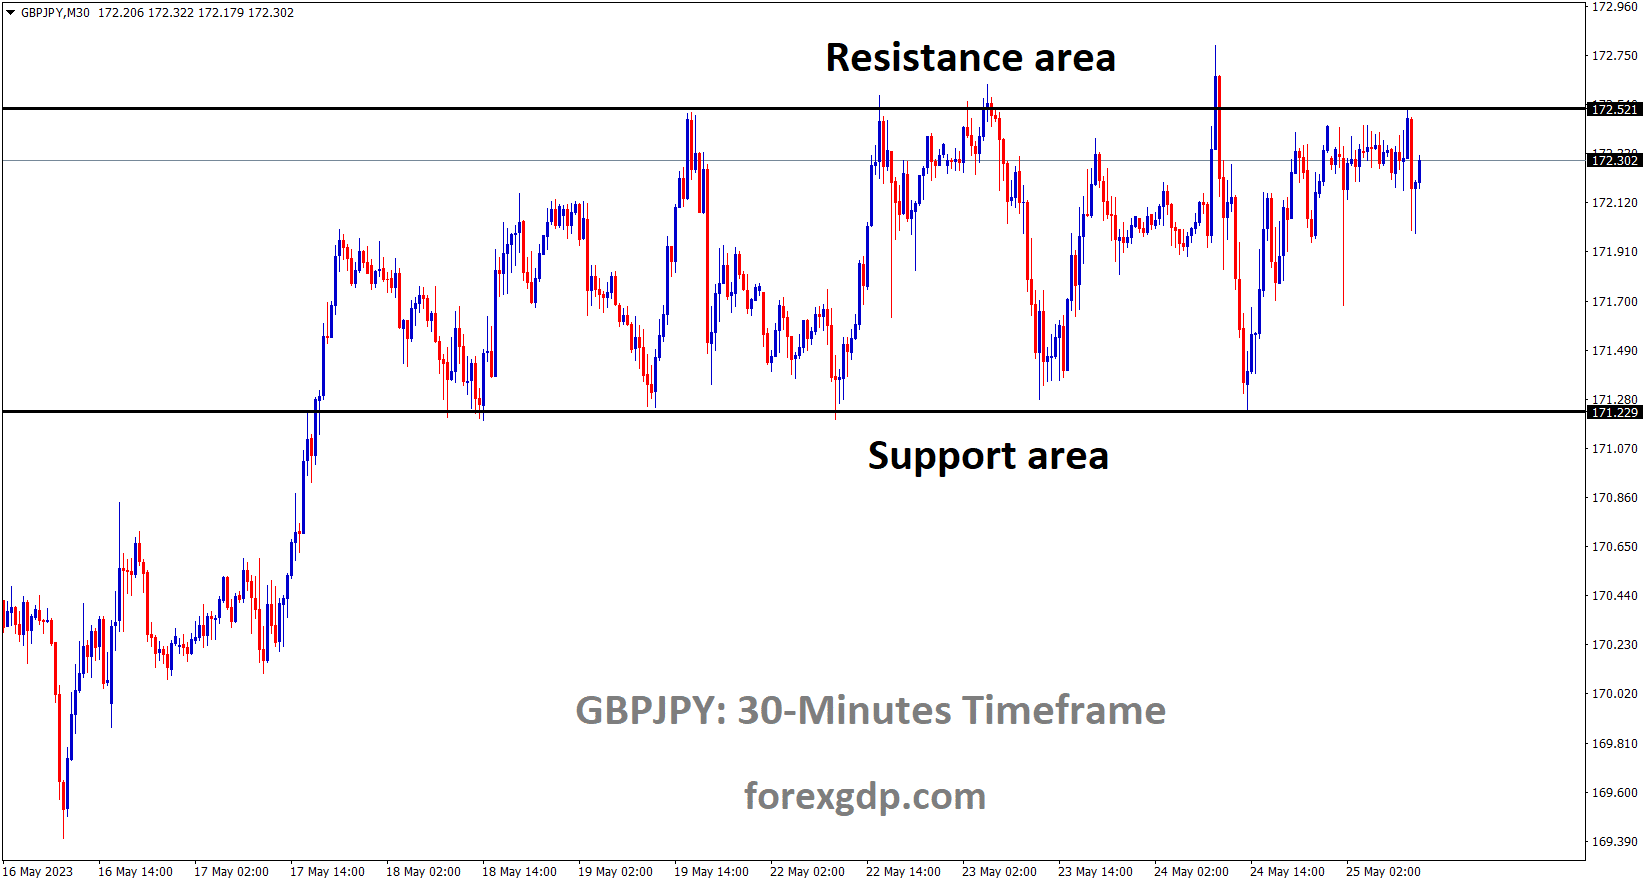 GBPJPY is moving in the Box pattern and the market has reached the resistance area of the pattern